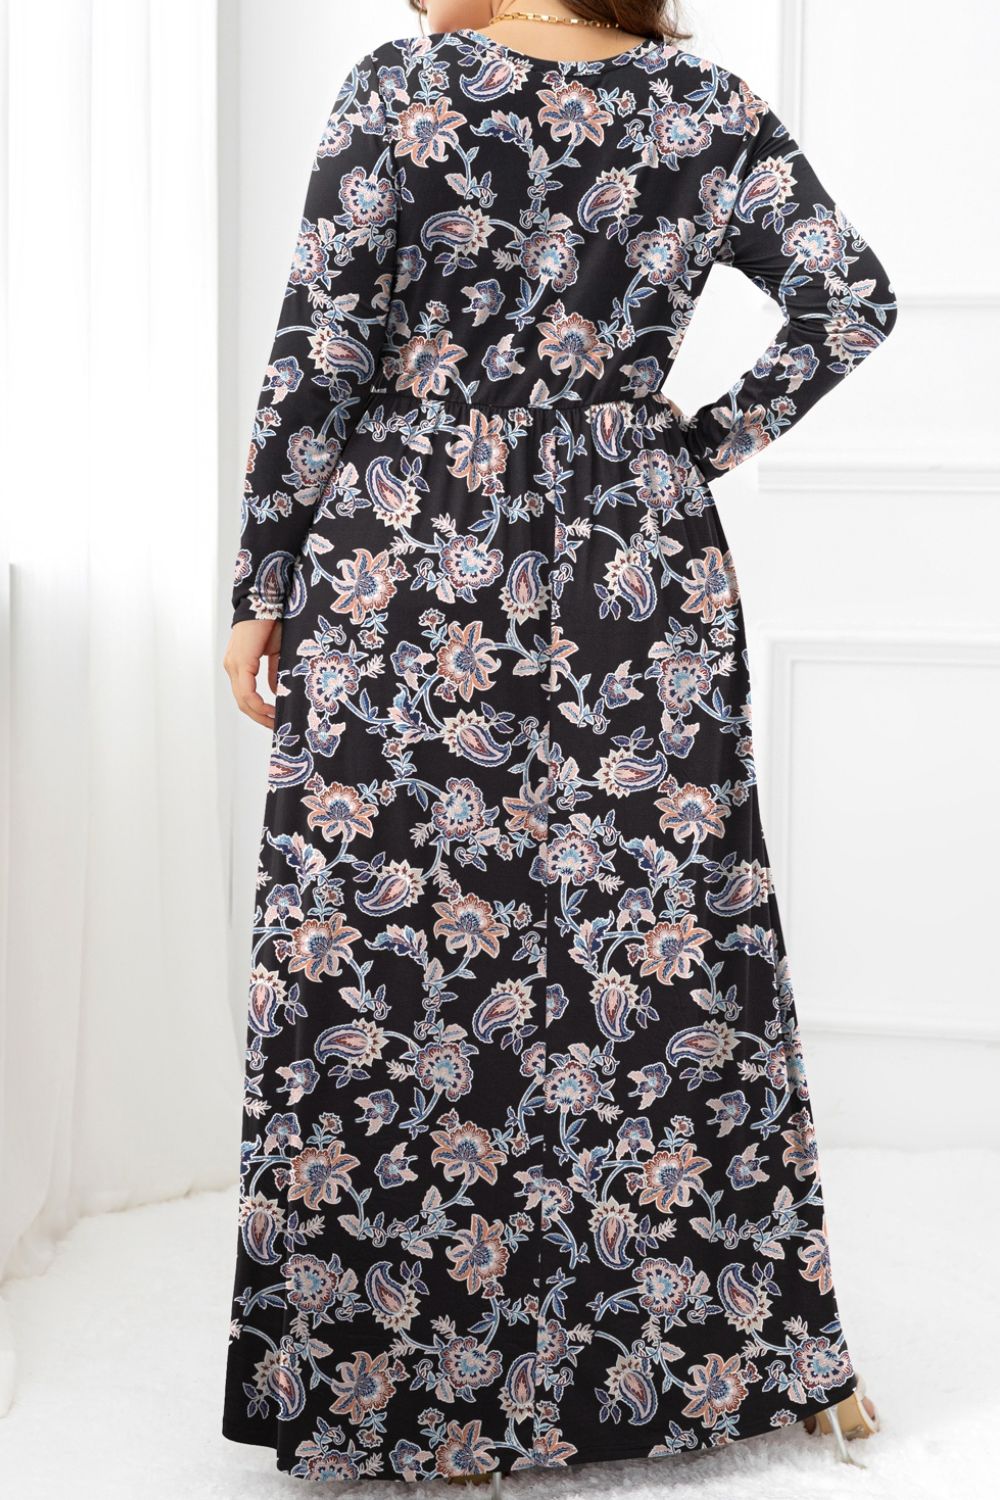 Plus Size Round Neck Long Sleeve Maxi Dress with Pockets